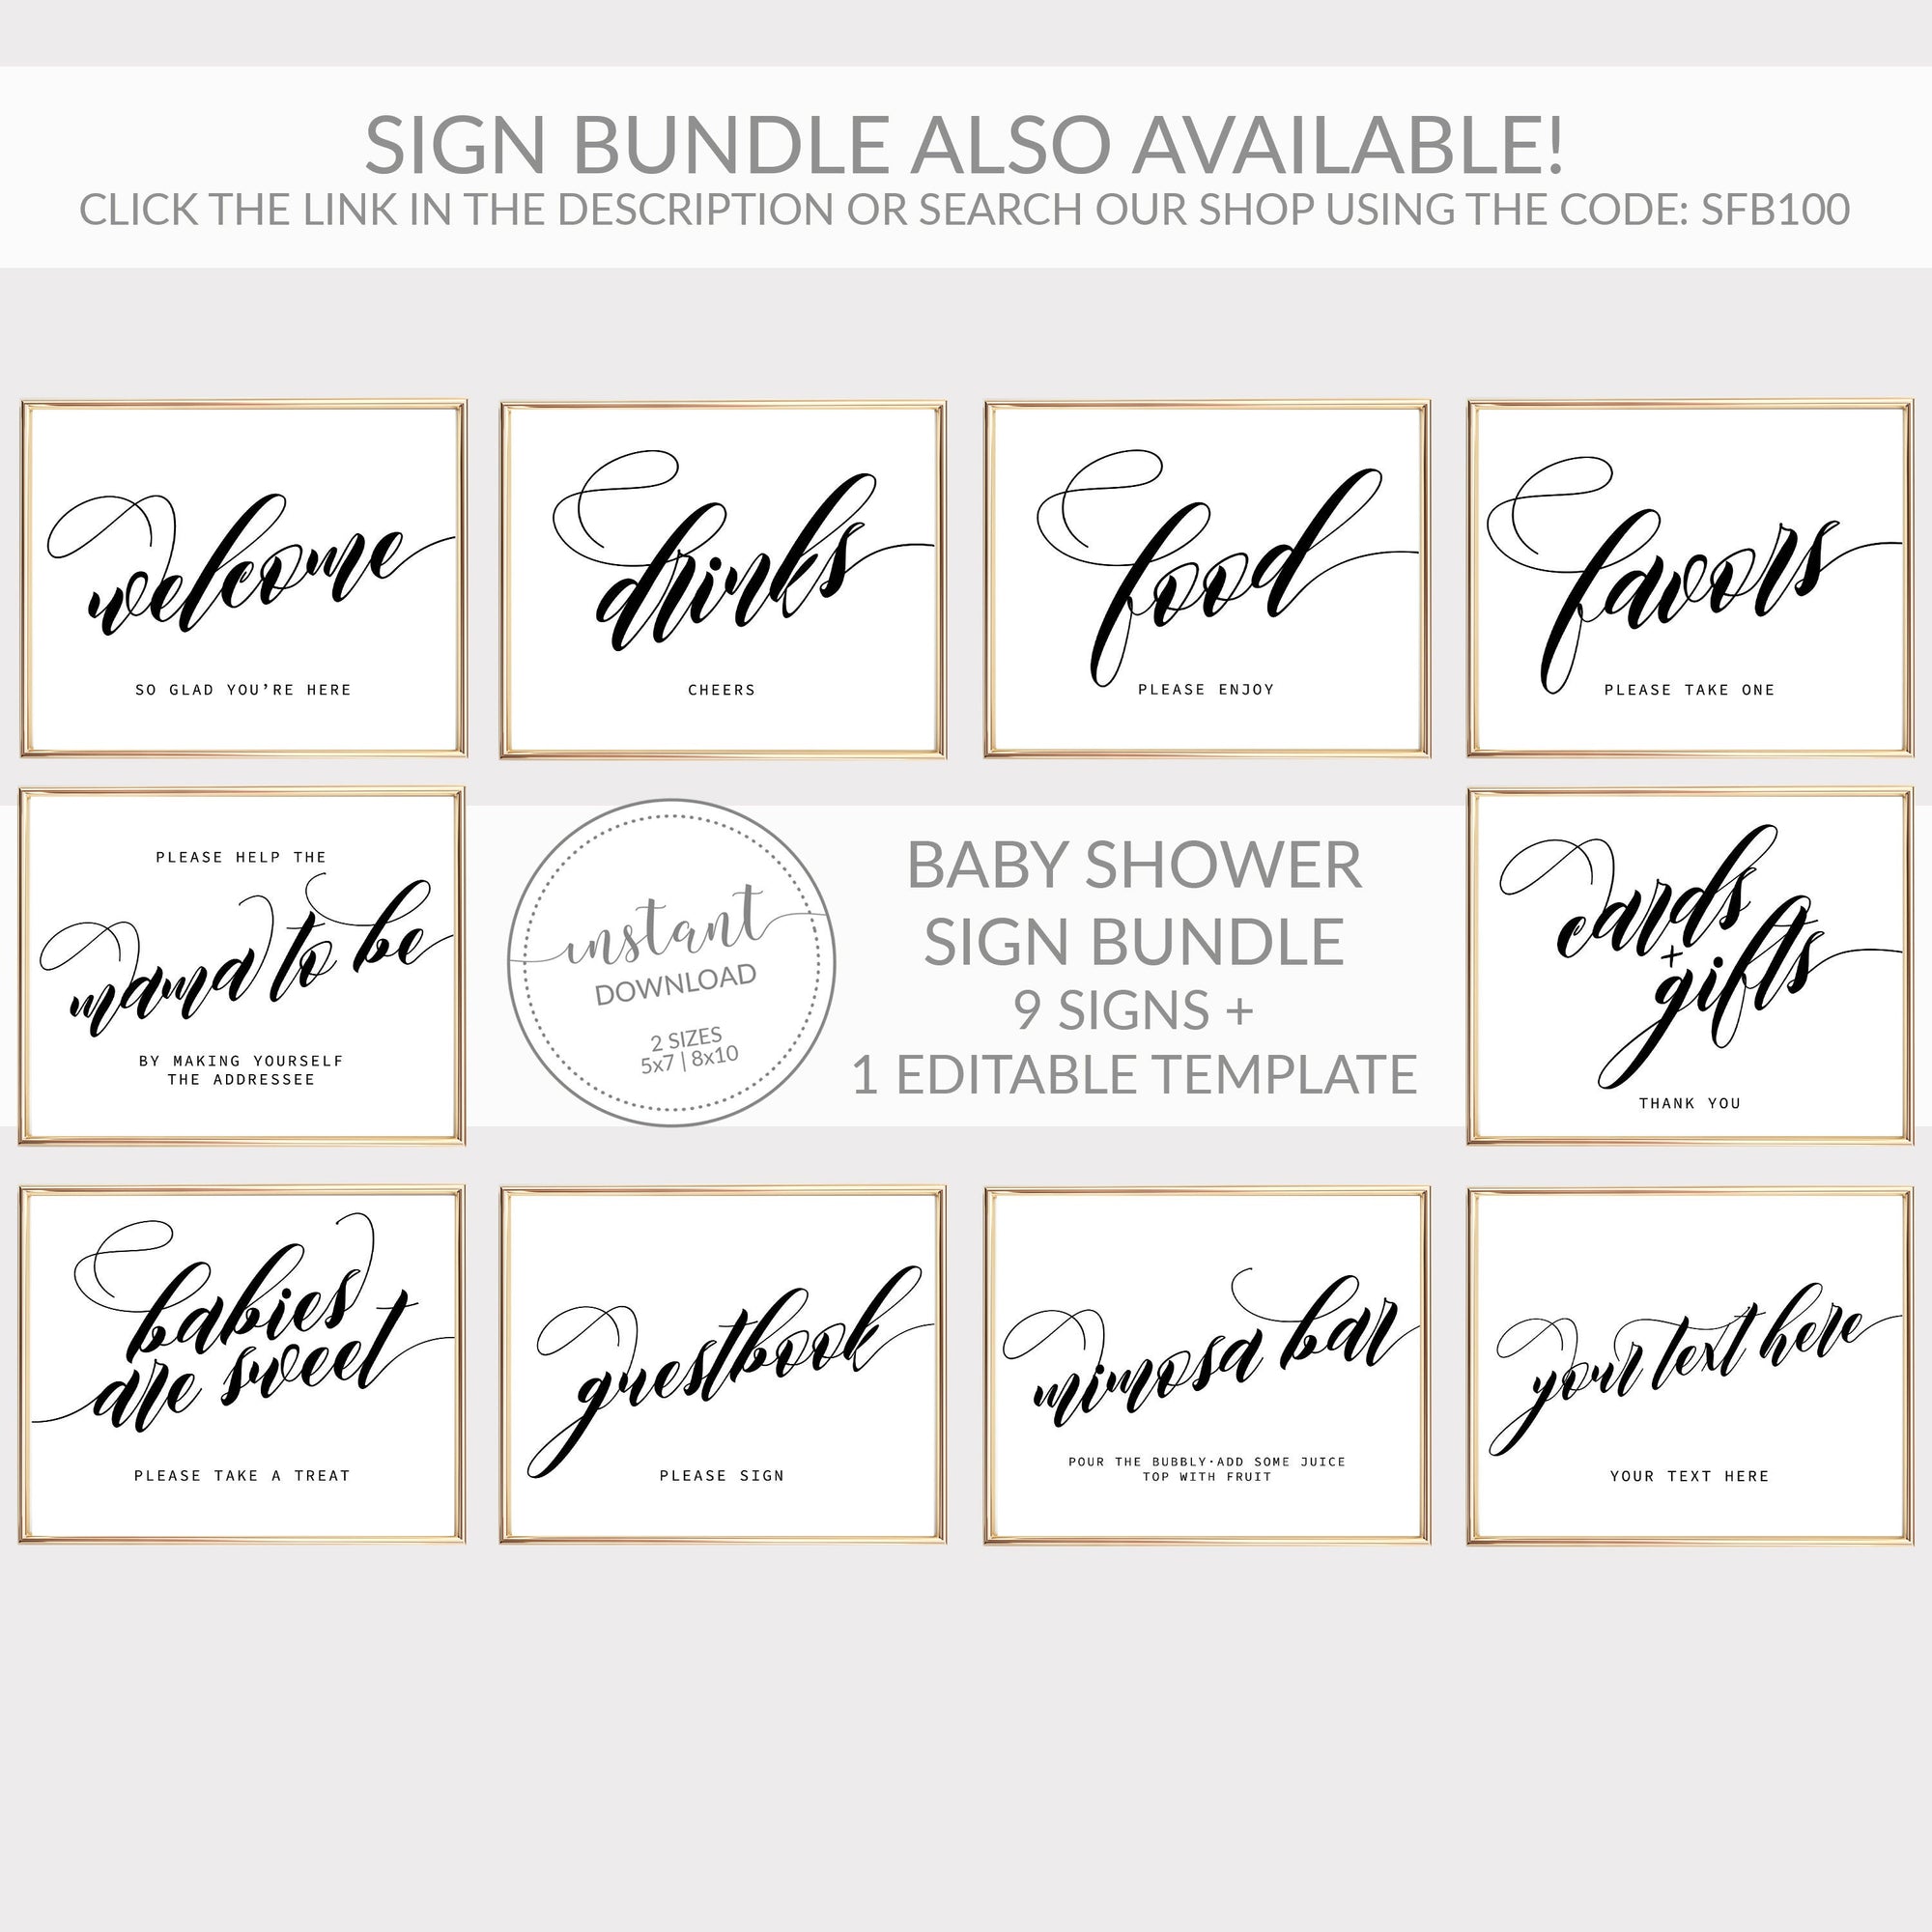 Black Script Sanitize Before Entering Welcome Sign, Minimalist Welcome Sign, INSTANT DOWNLOAD - SFB100